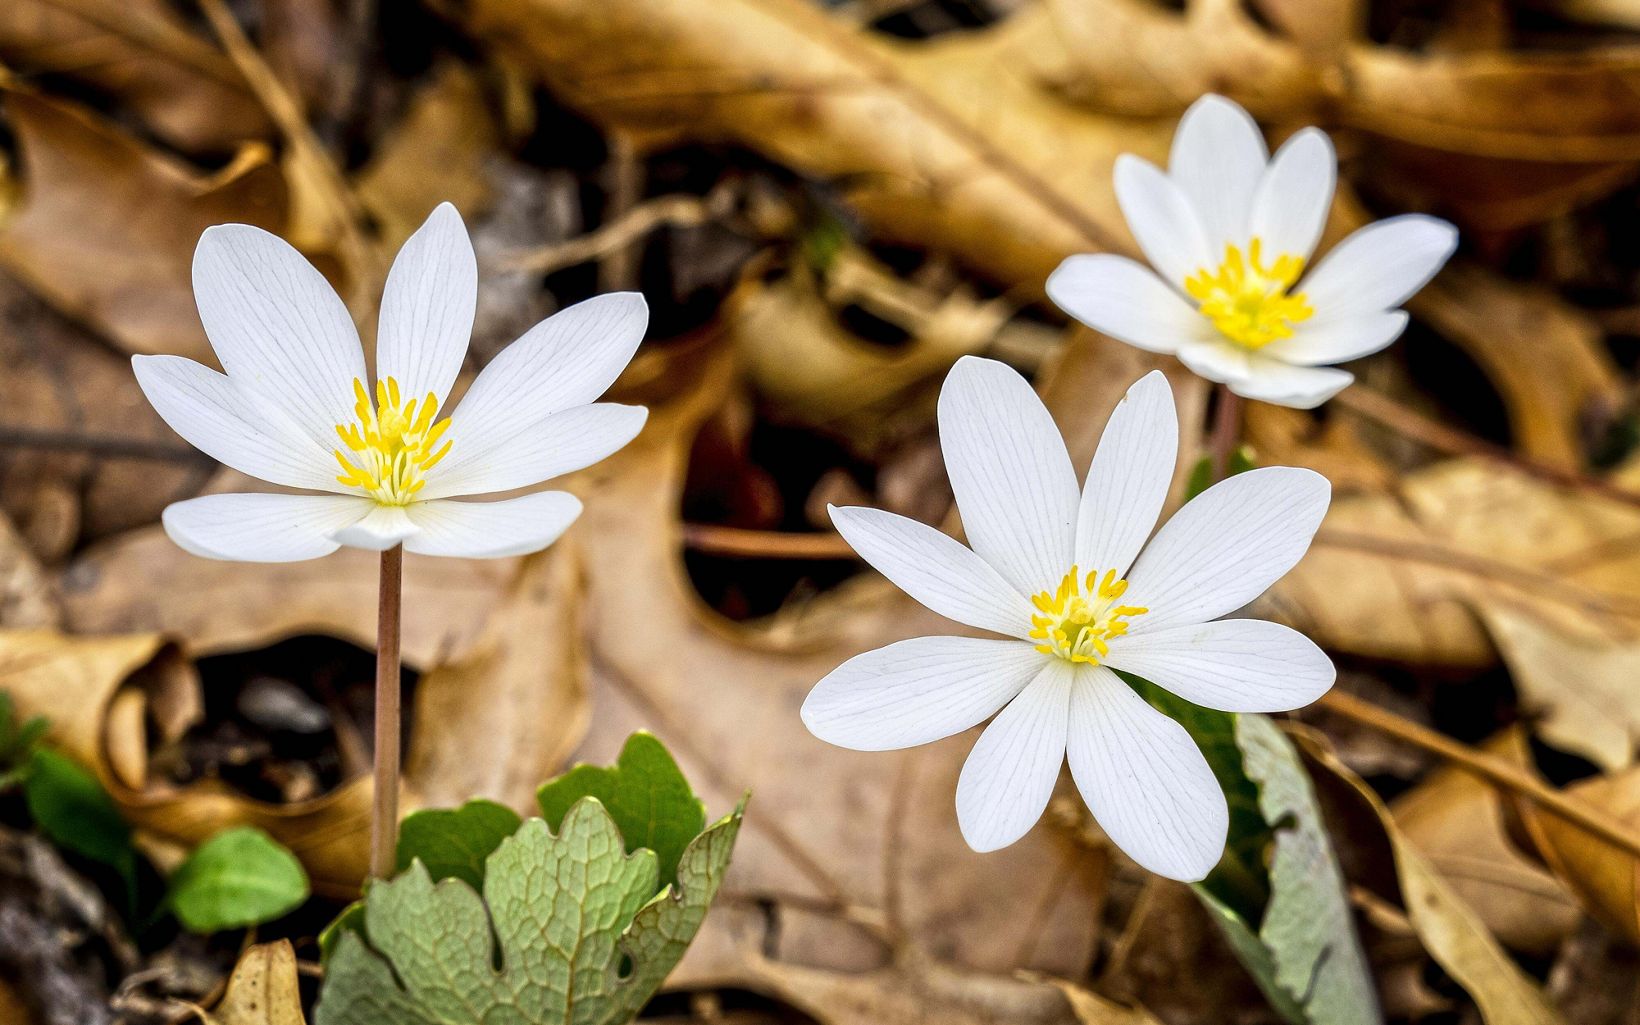 Three bloodroot flowers blooming among leaf litter. 